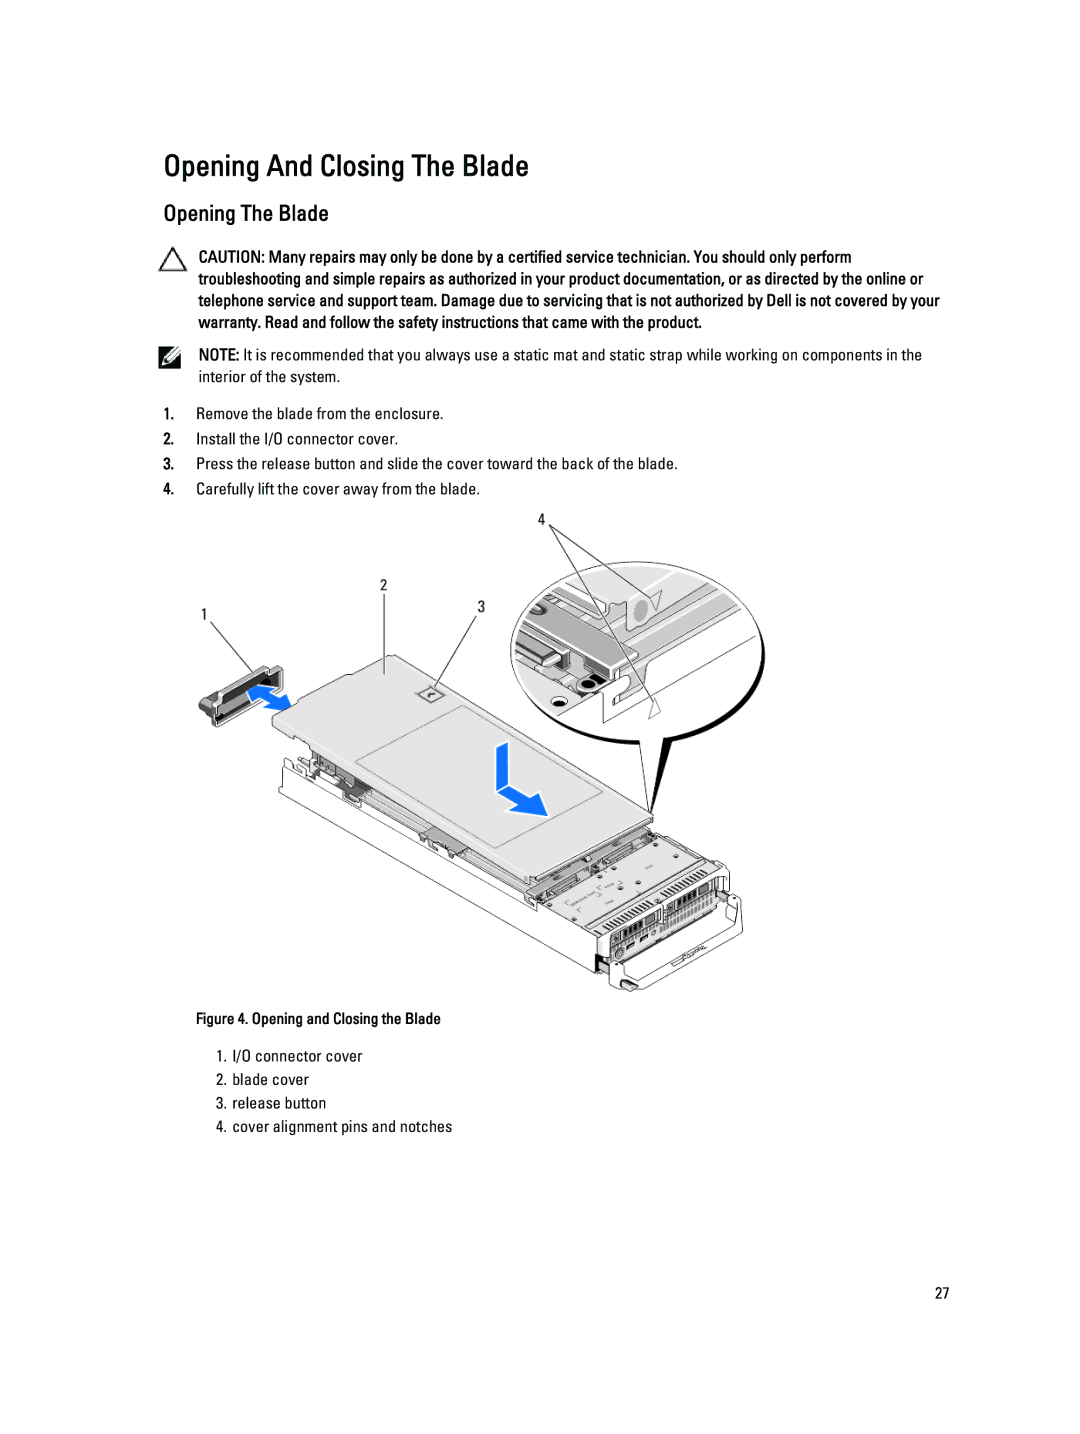 Dell M620 owner manual Opening And Closing The Blade, Opening The Blade 